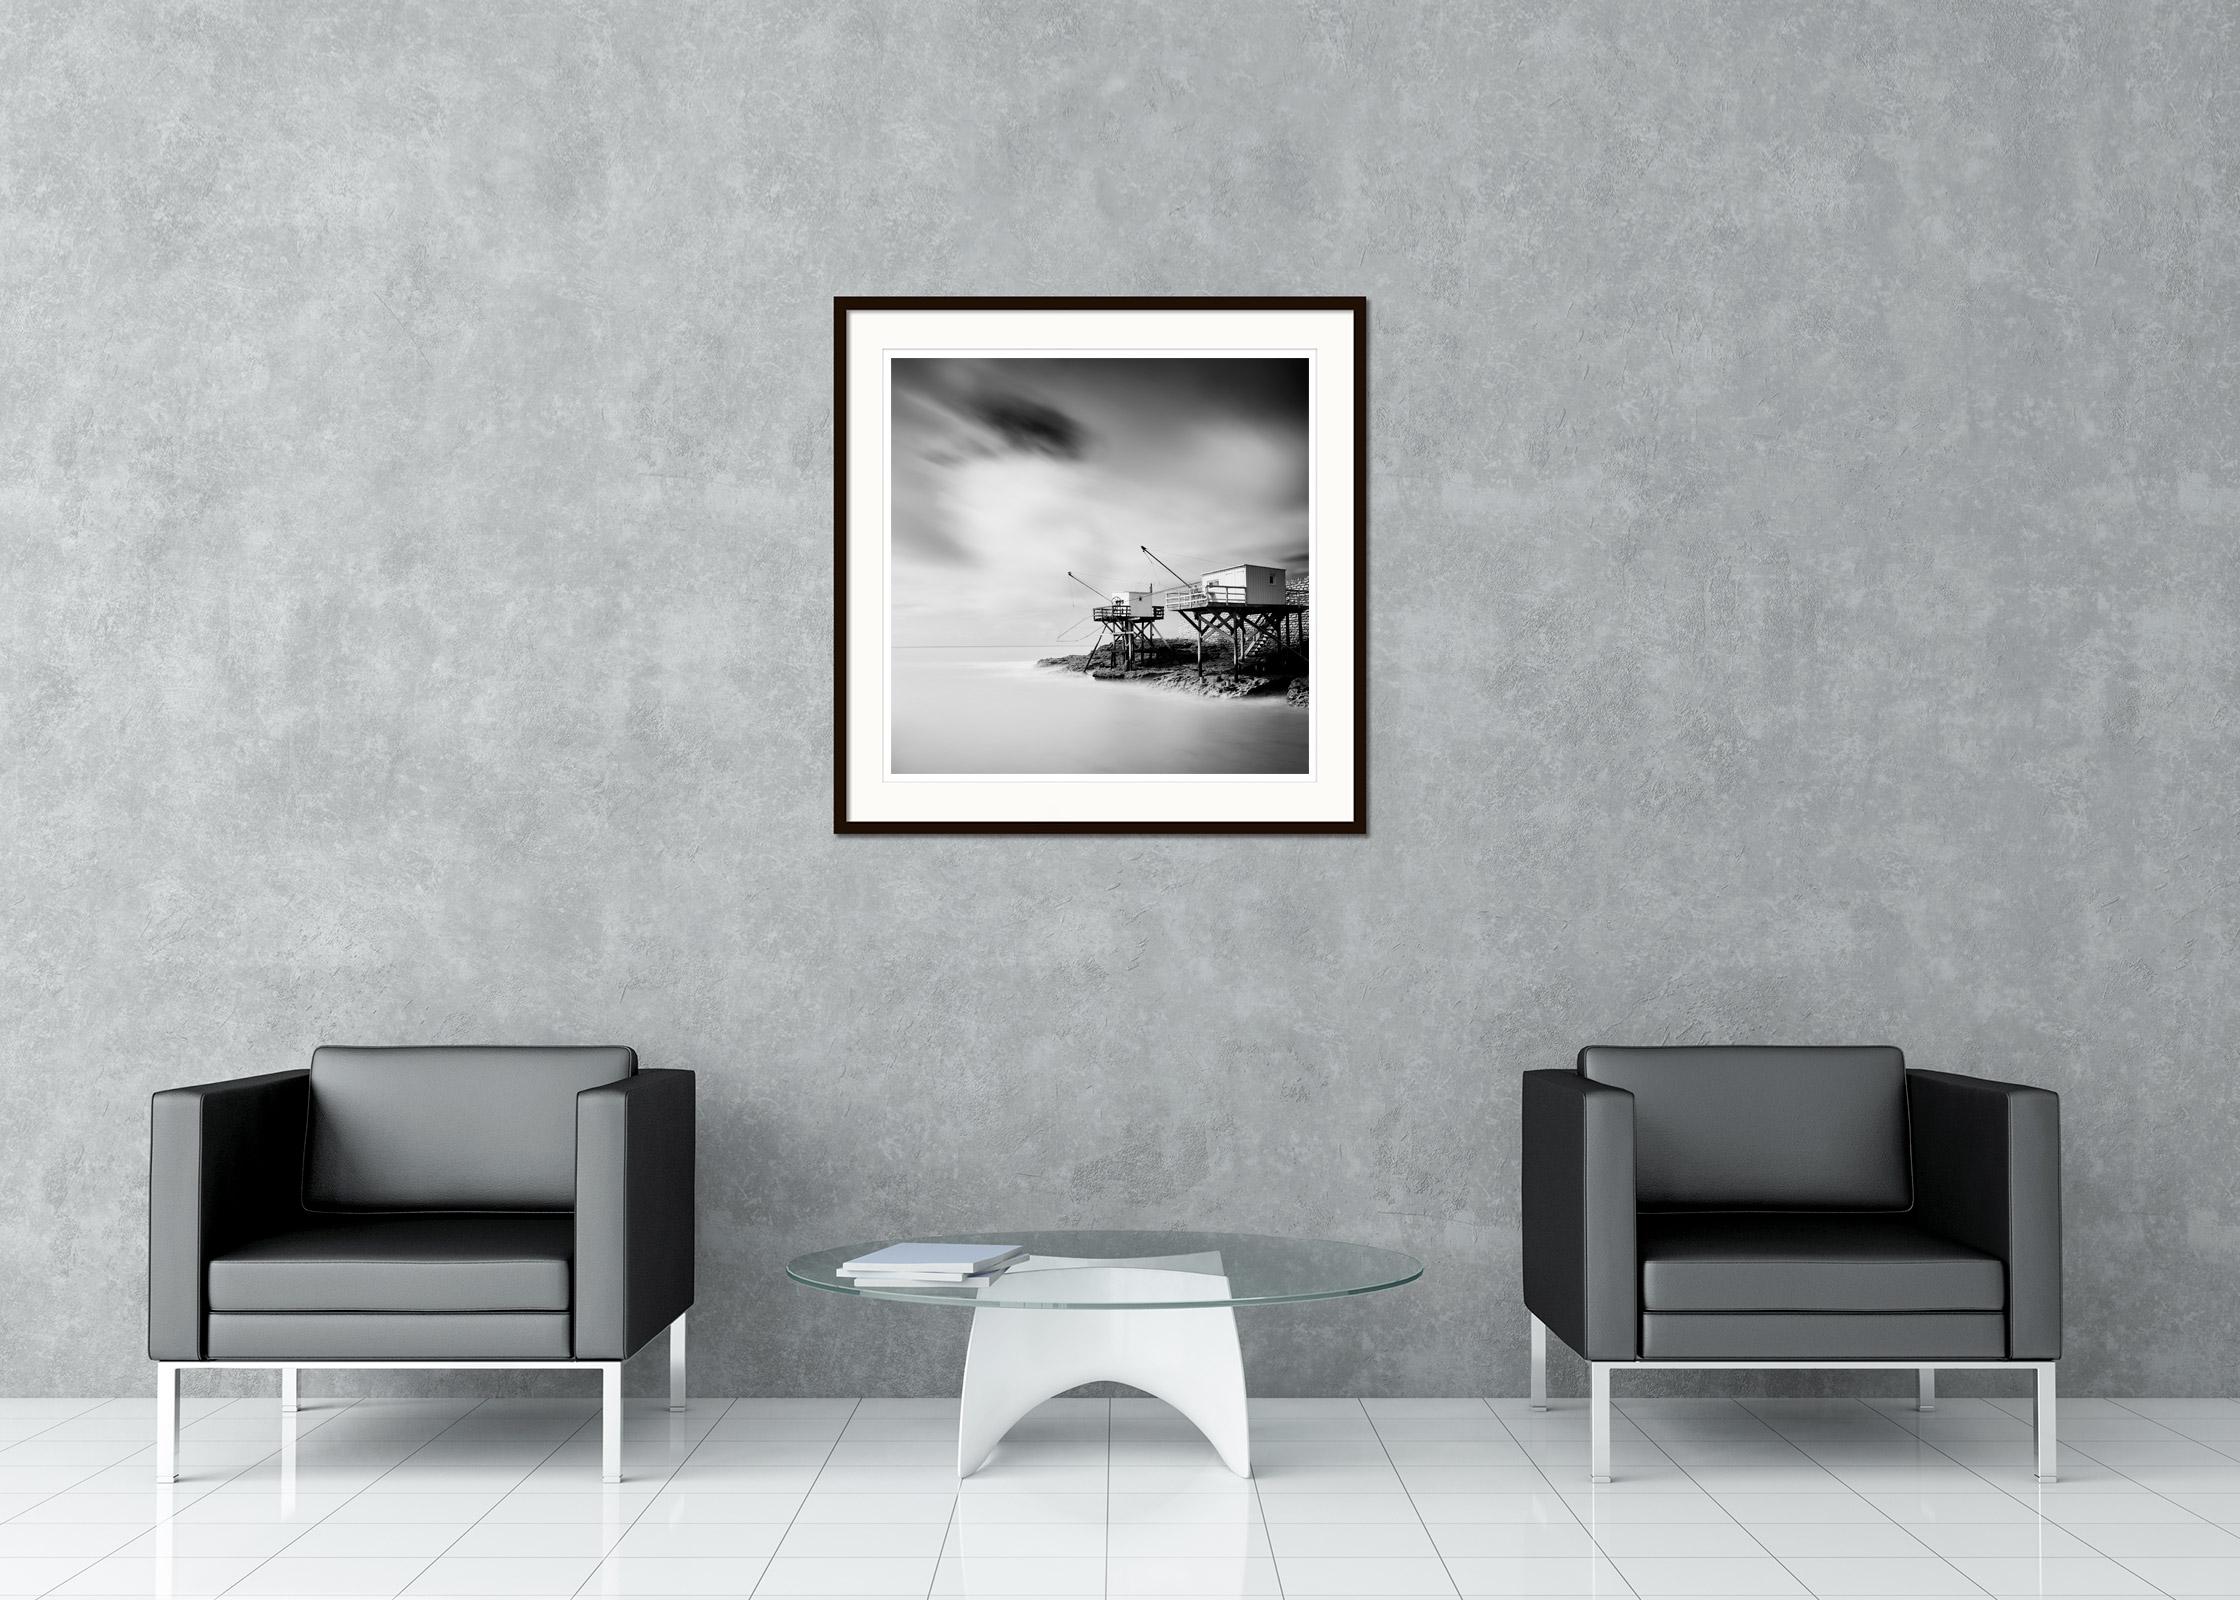 Black and white fine art long exposure waterscape - landscape photography print. Fishing stilt houses on the stormy Atlantic coast of France. Archival pigment ink print, edition of 9. Signed, titled, dated and numbered by artist. Certificate of